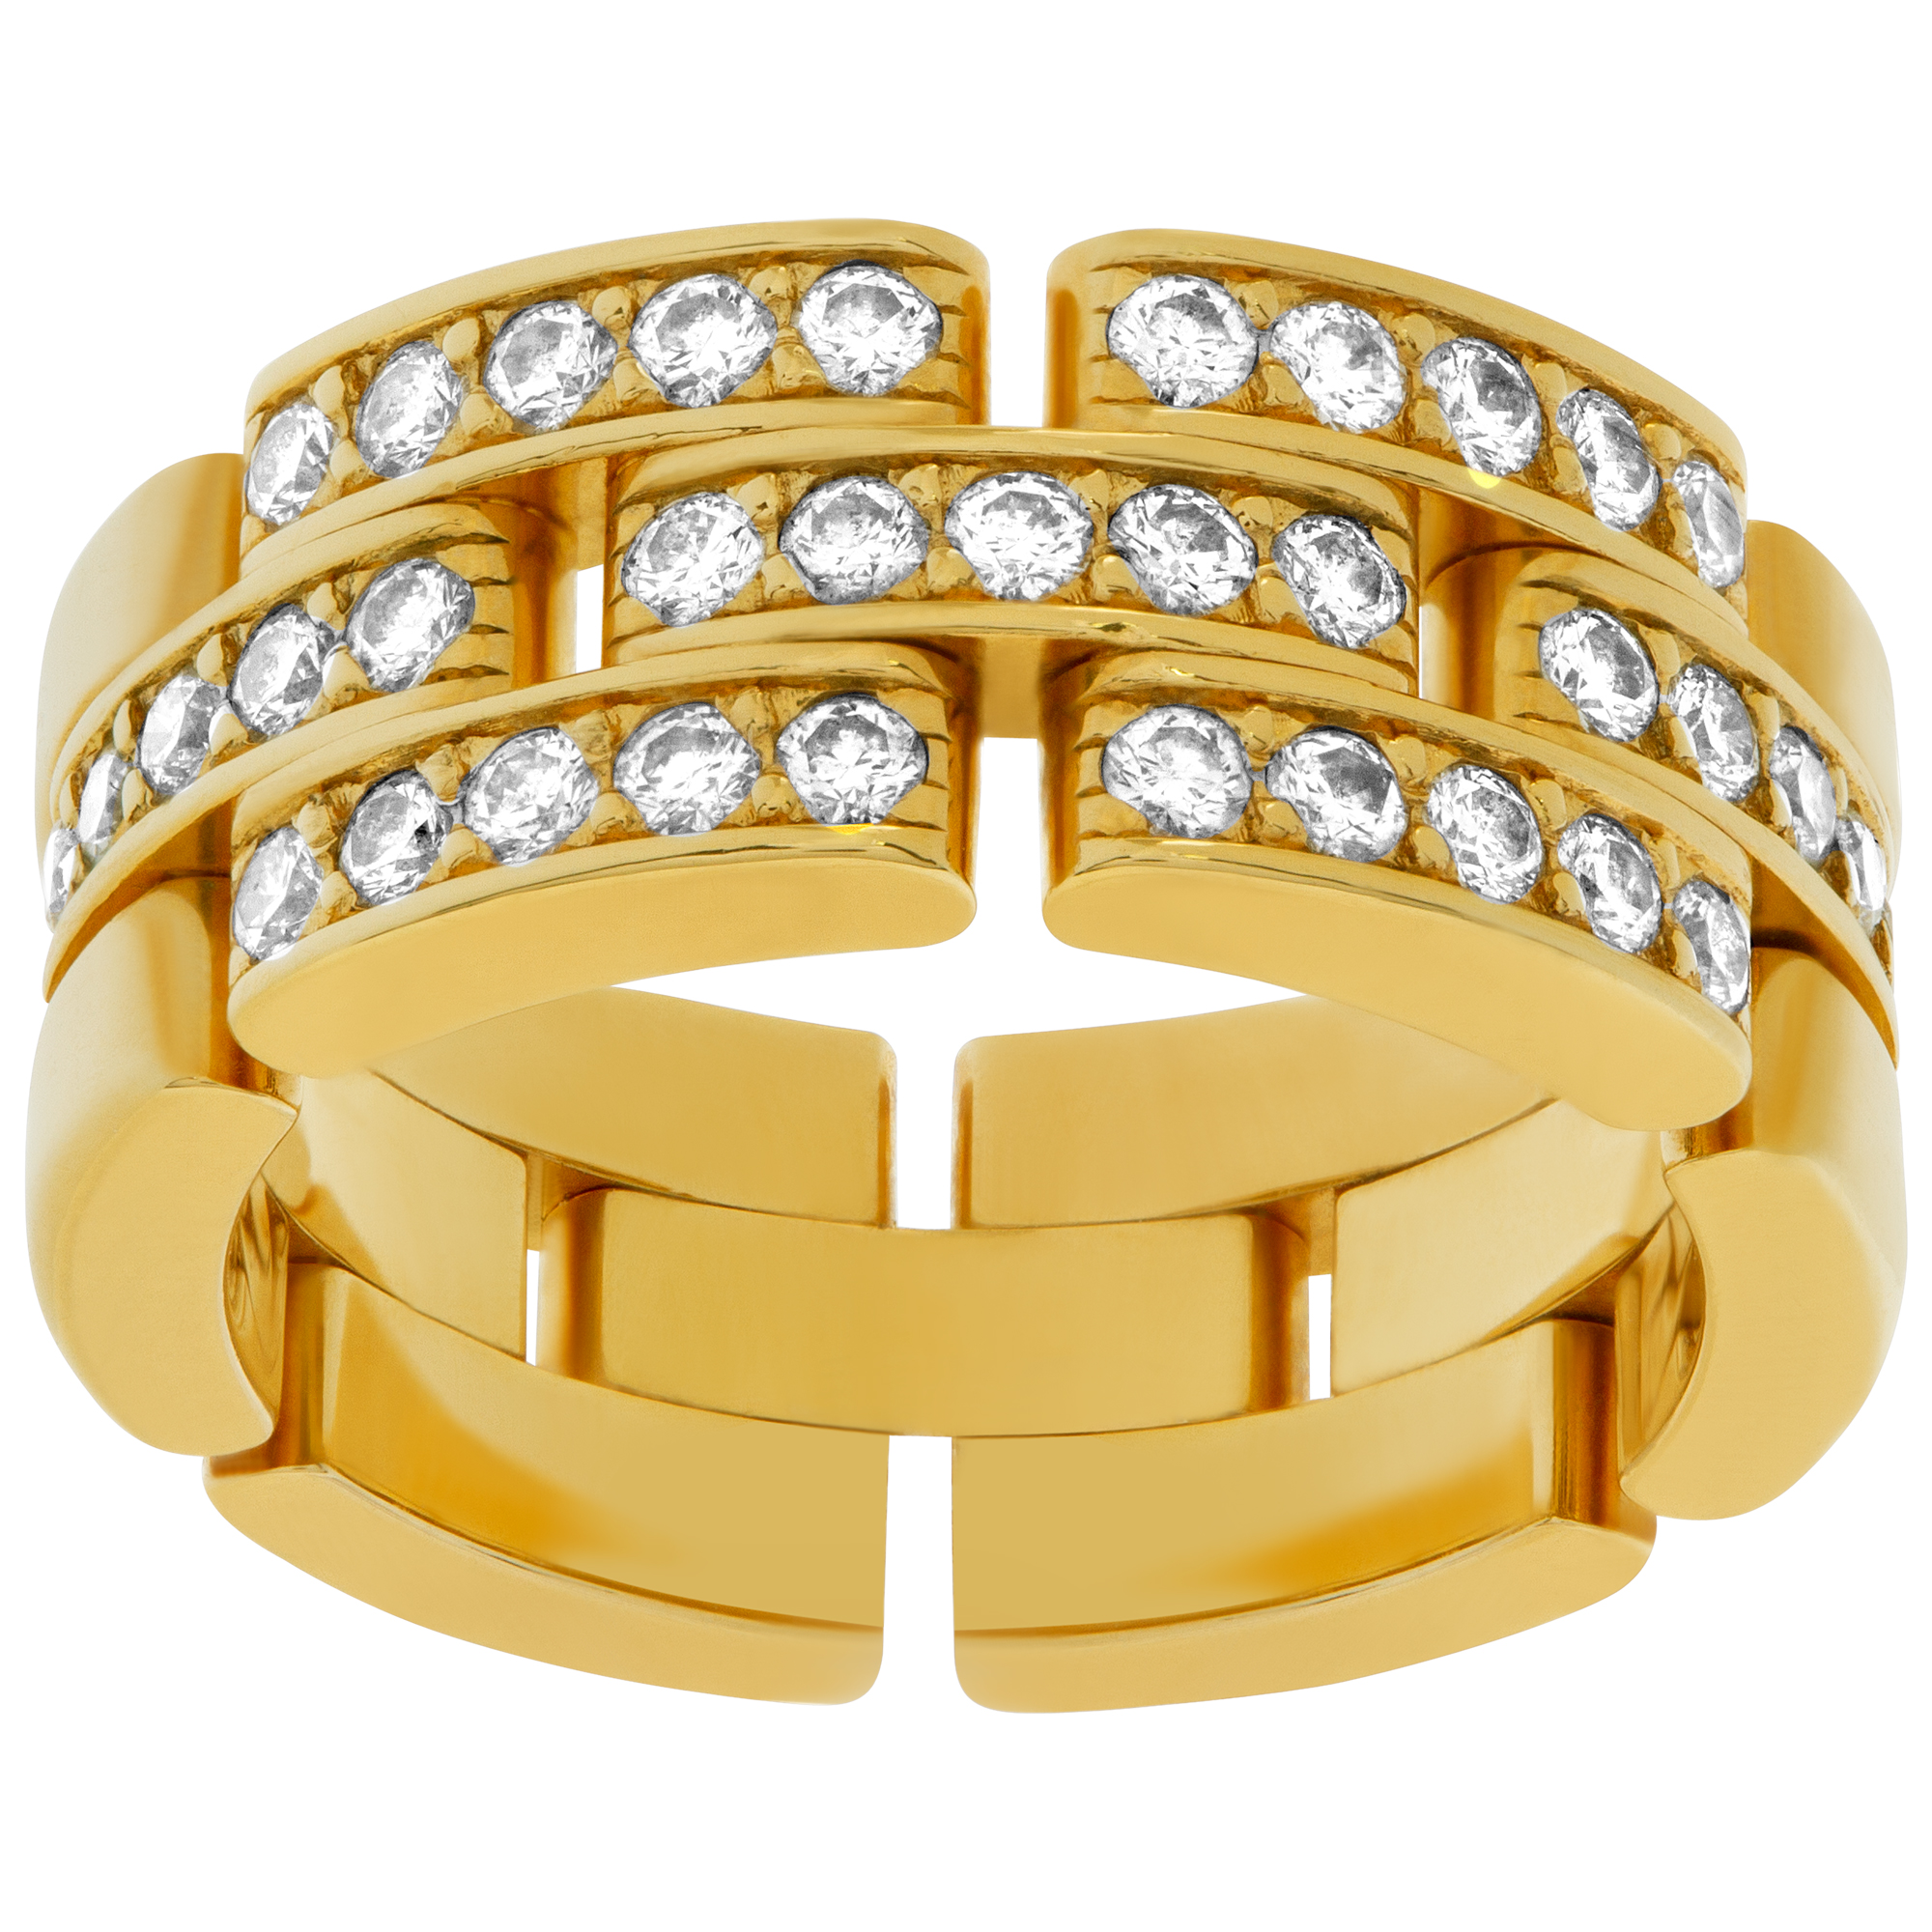 Elegant Cartier Panthere link ring 18k yellow gold with diamonds.